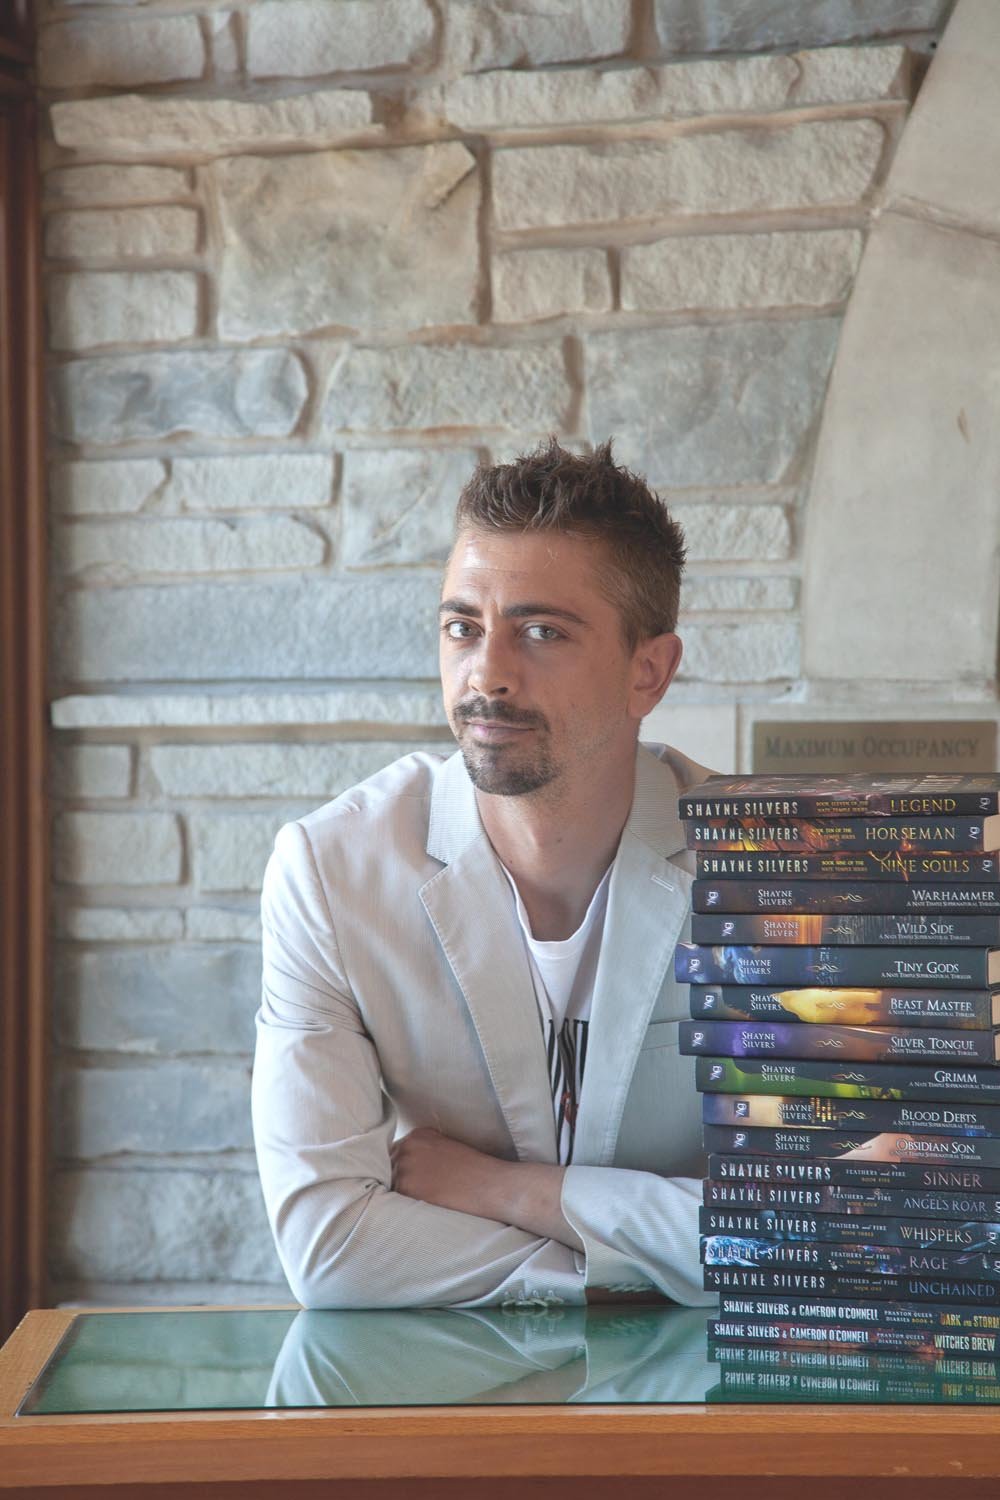 Author Shayne Silvers plans to self-publish nearly 20 books this year.